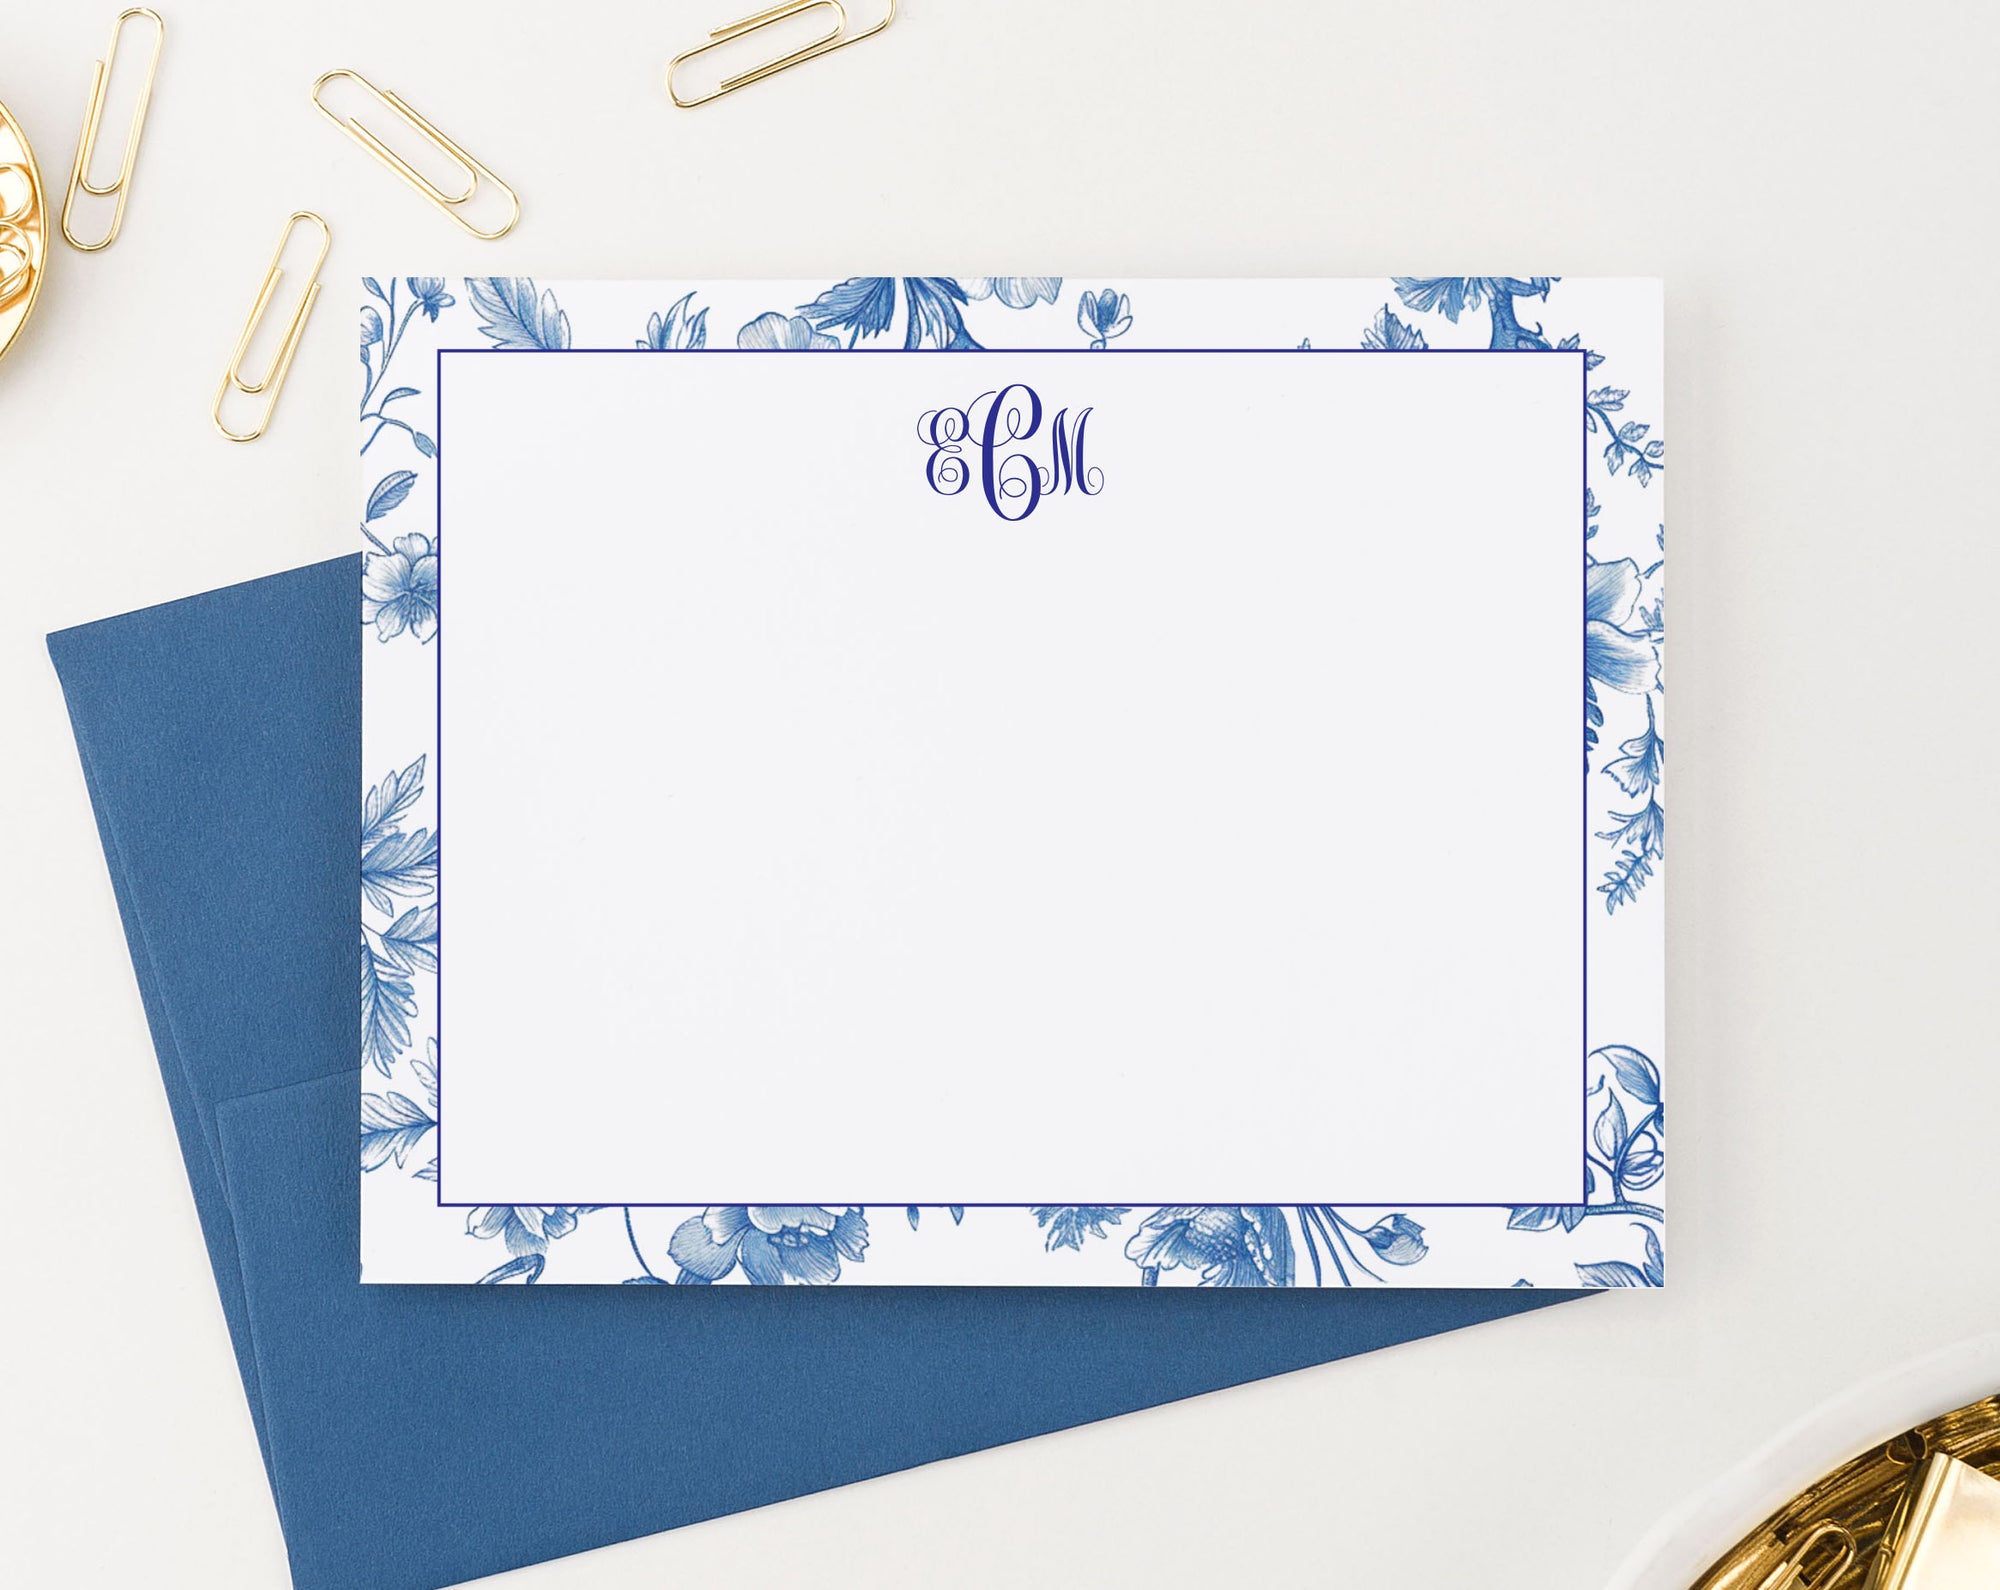 Chinoiserie Monogrammed Stationery Note Cards Personalized